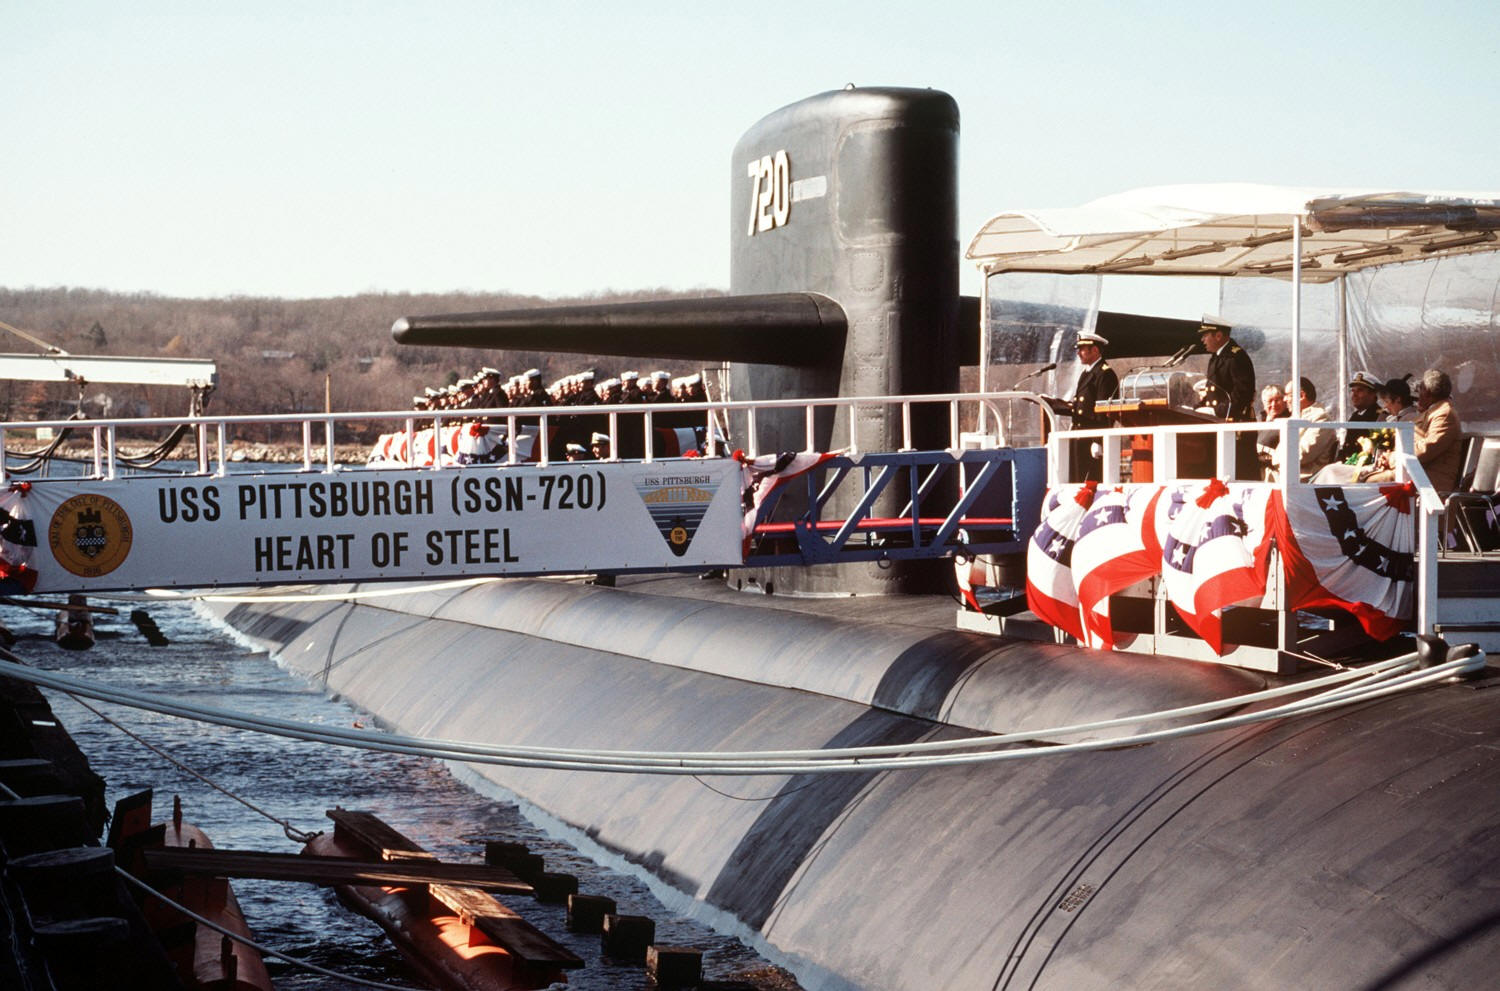 ssn-720 uss pittsburgh commissioning 1985